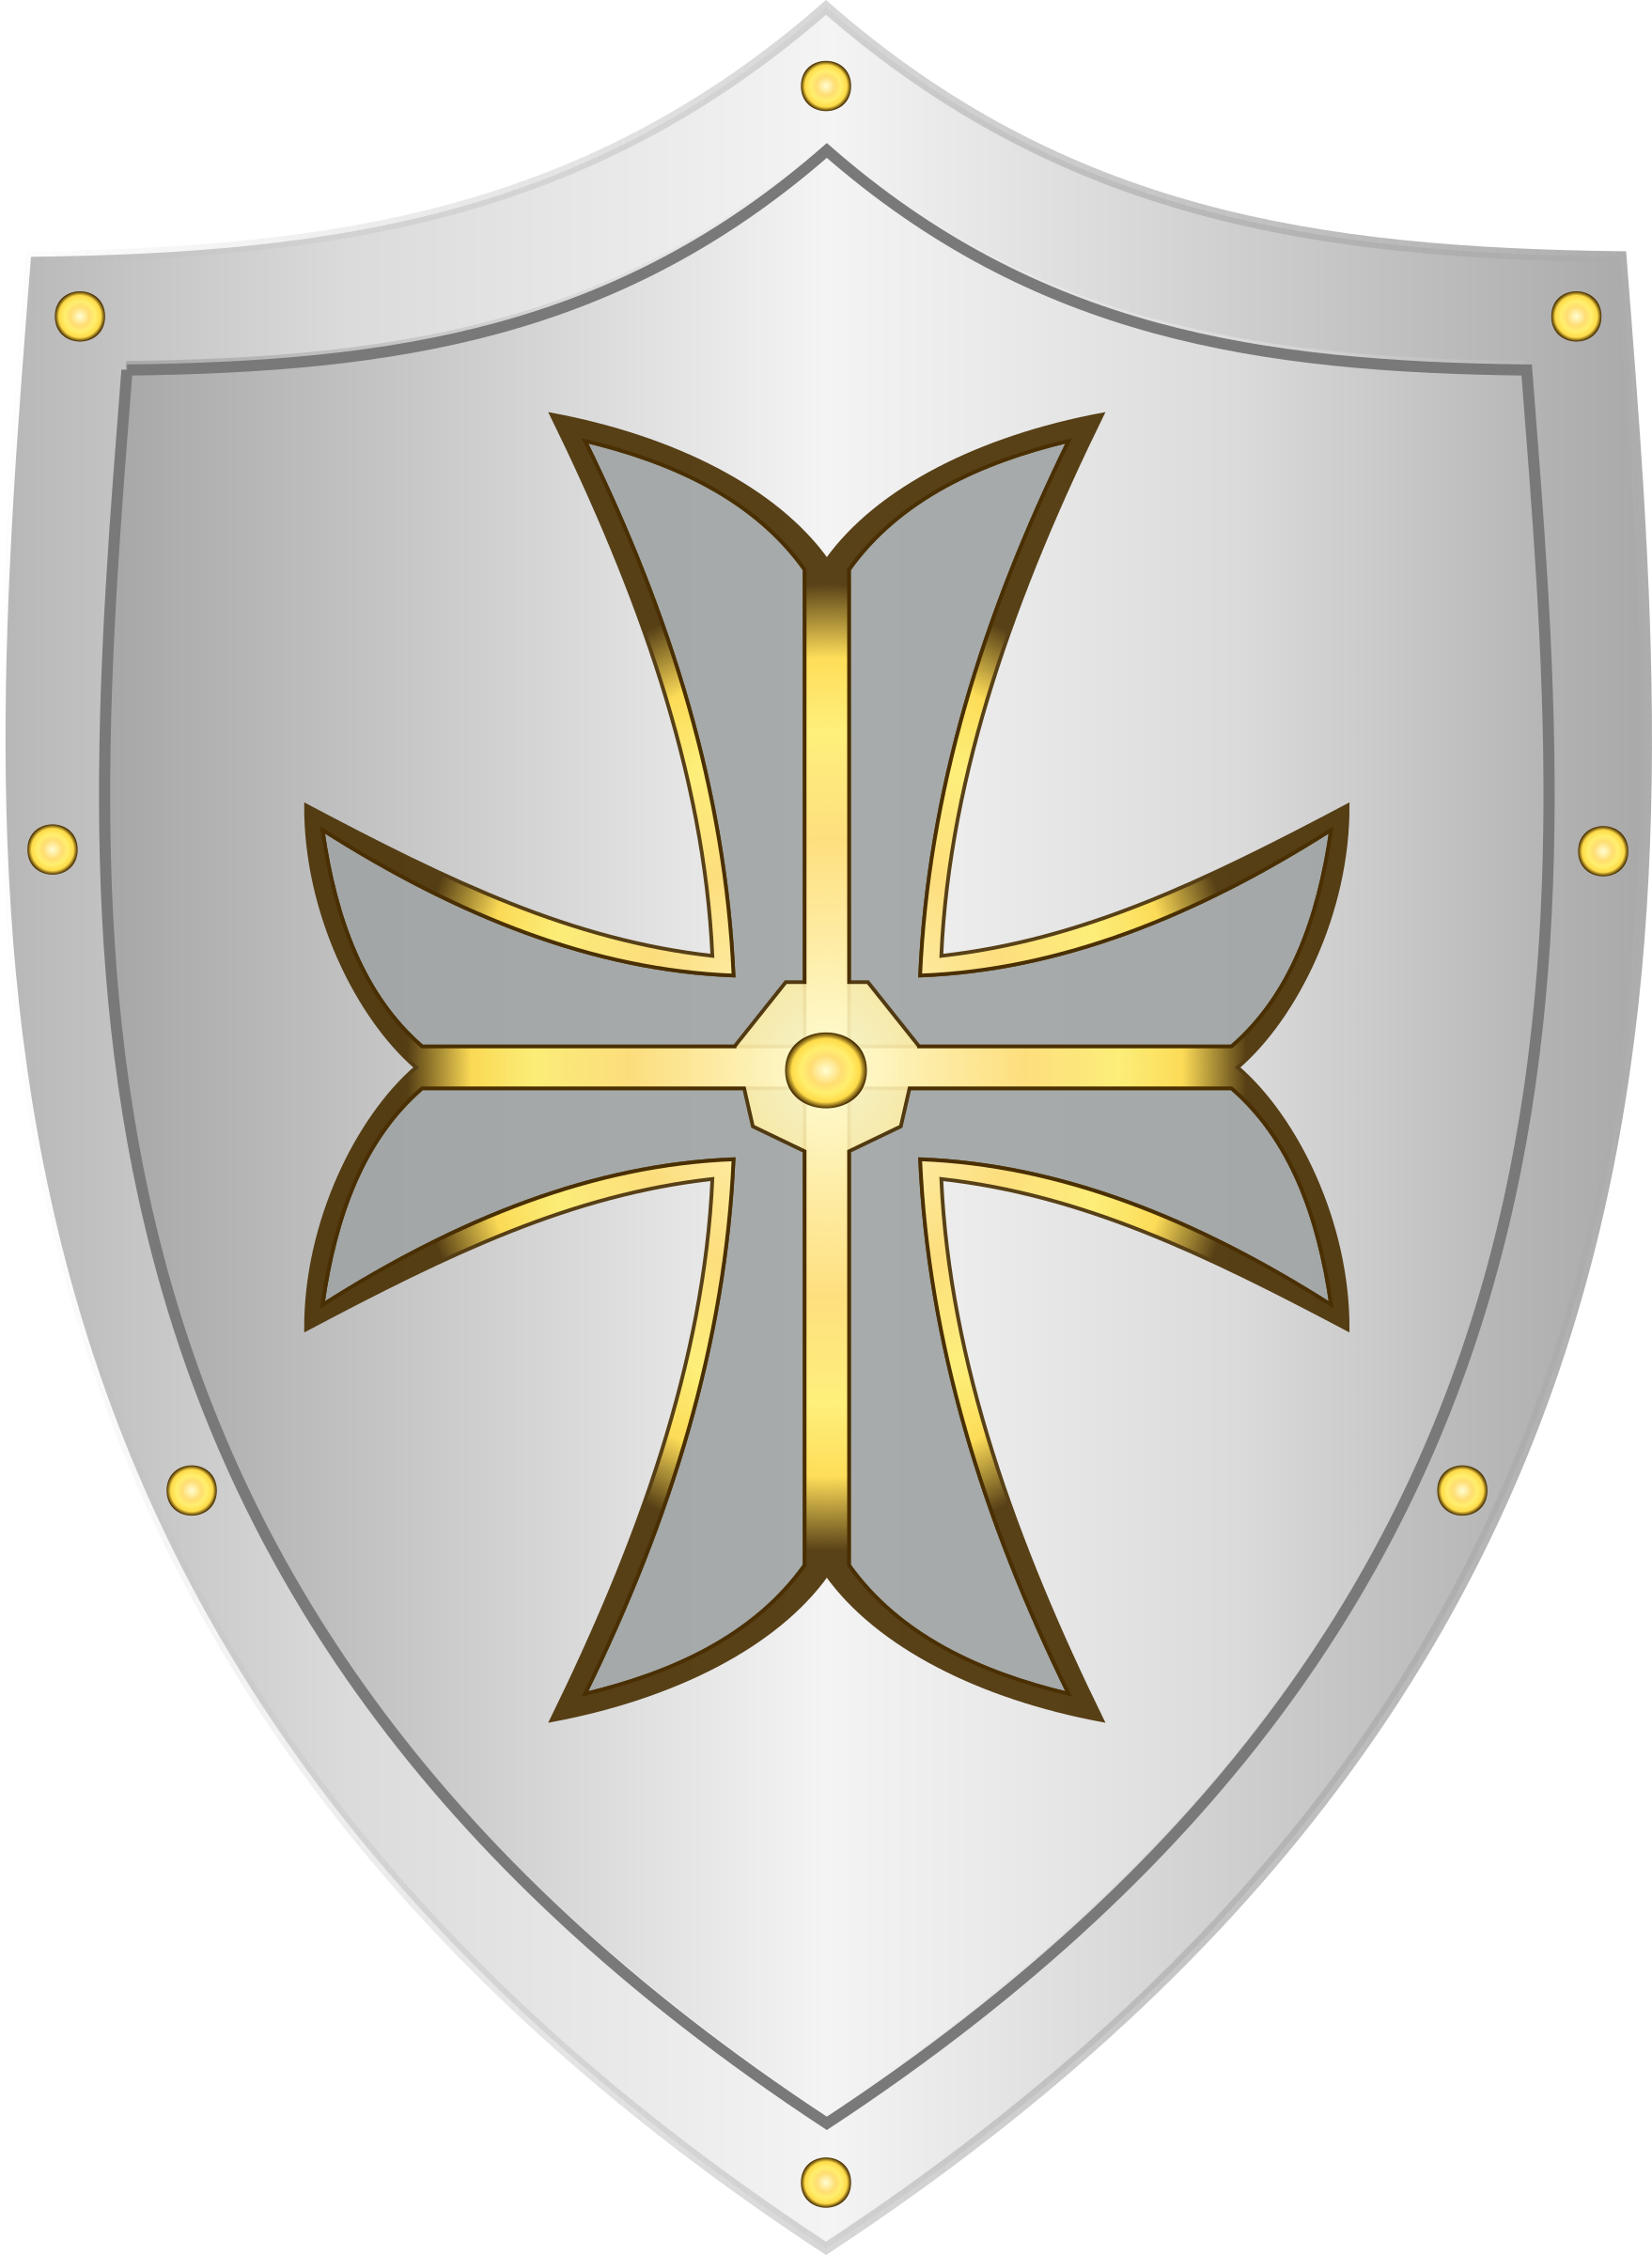 Clipart shield. Remix of classic medieval